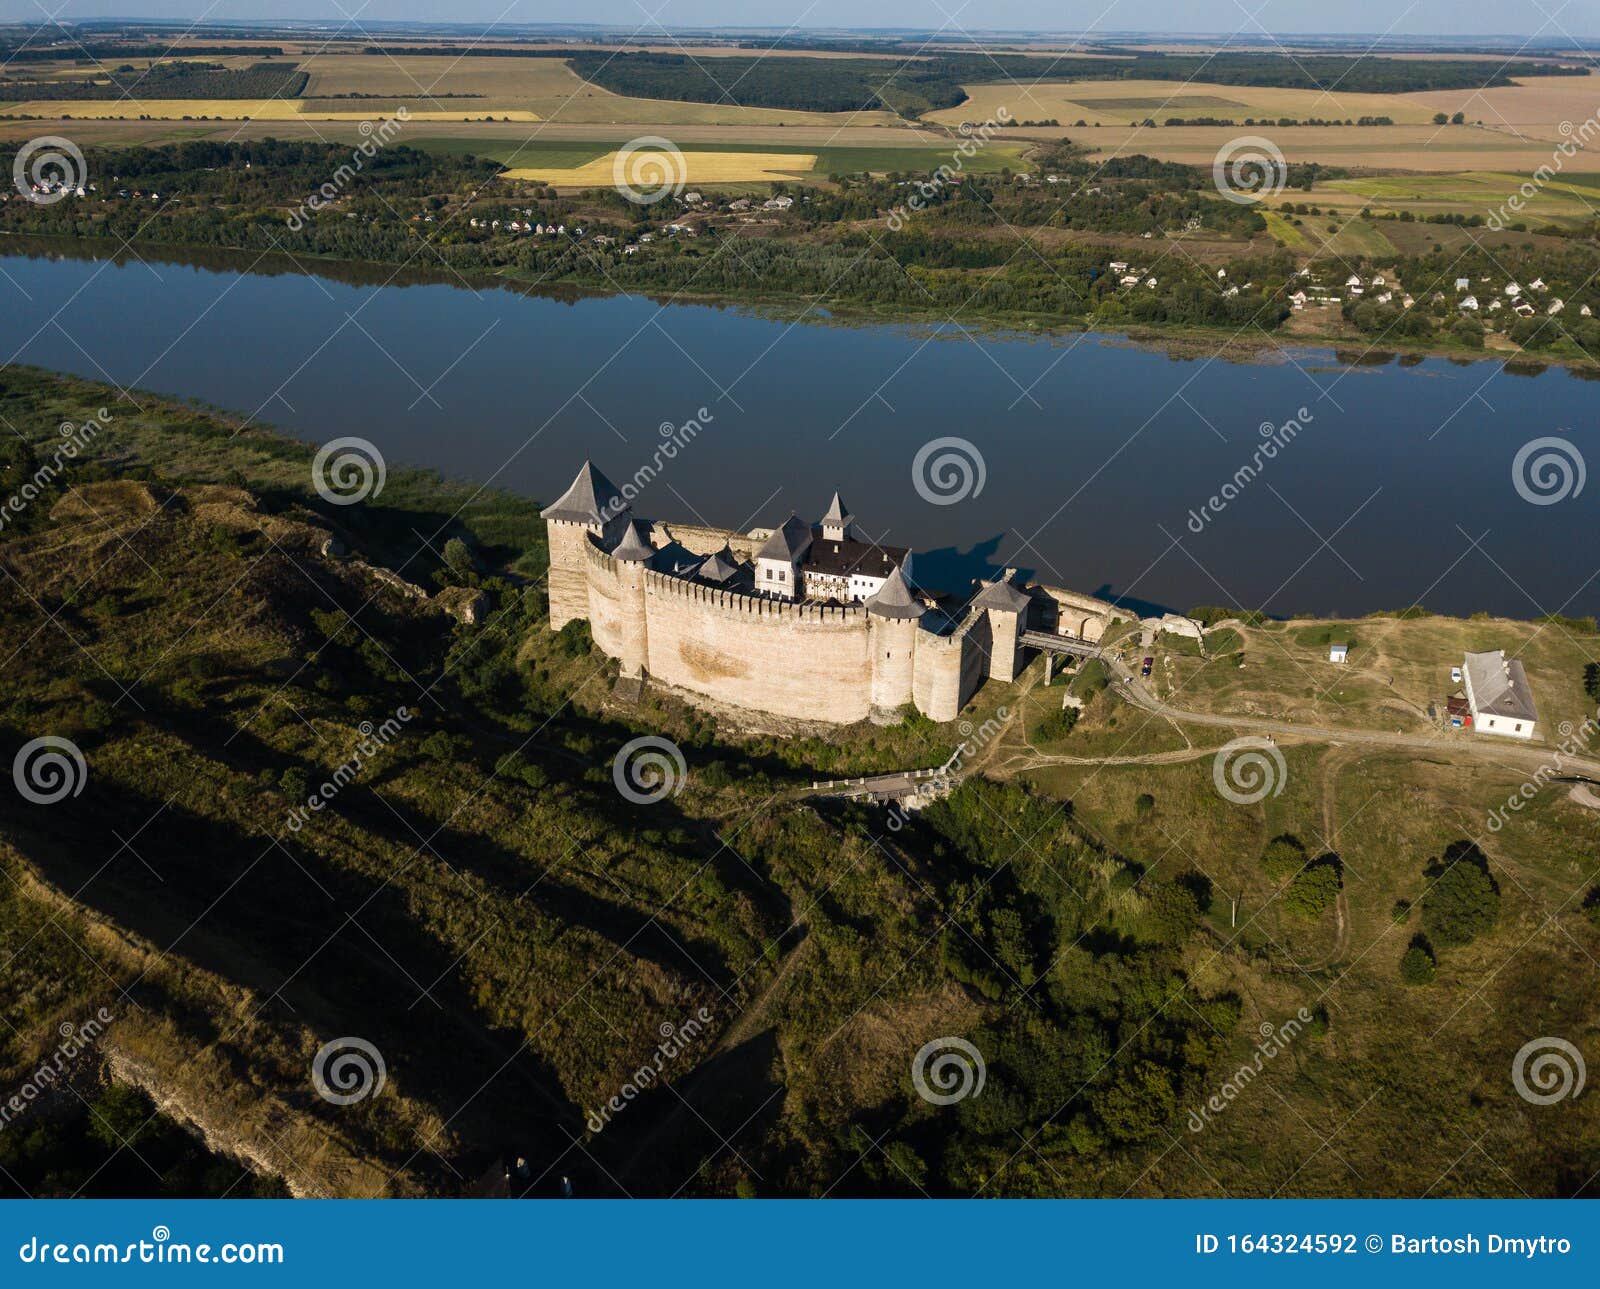 medieval fortress in the khotyn town west ukraine. the castle is the seventh wonder of ukraine